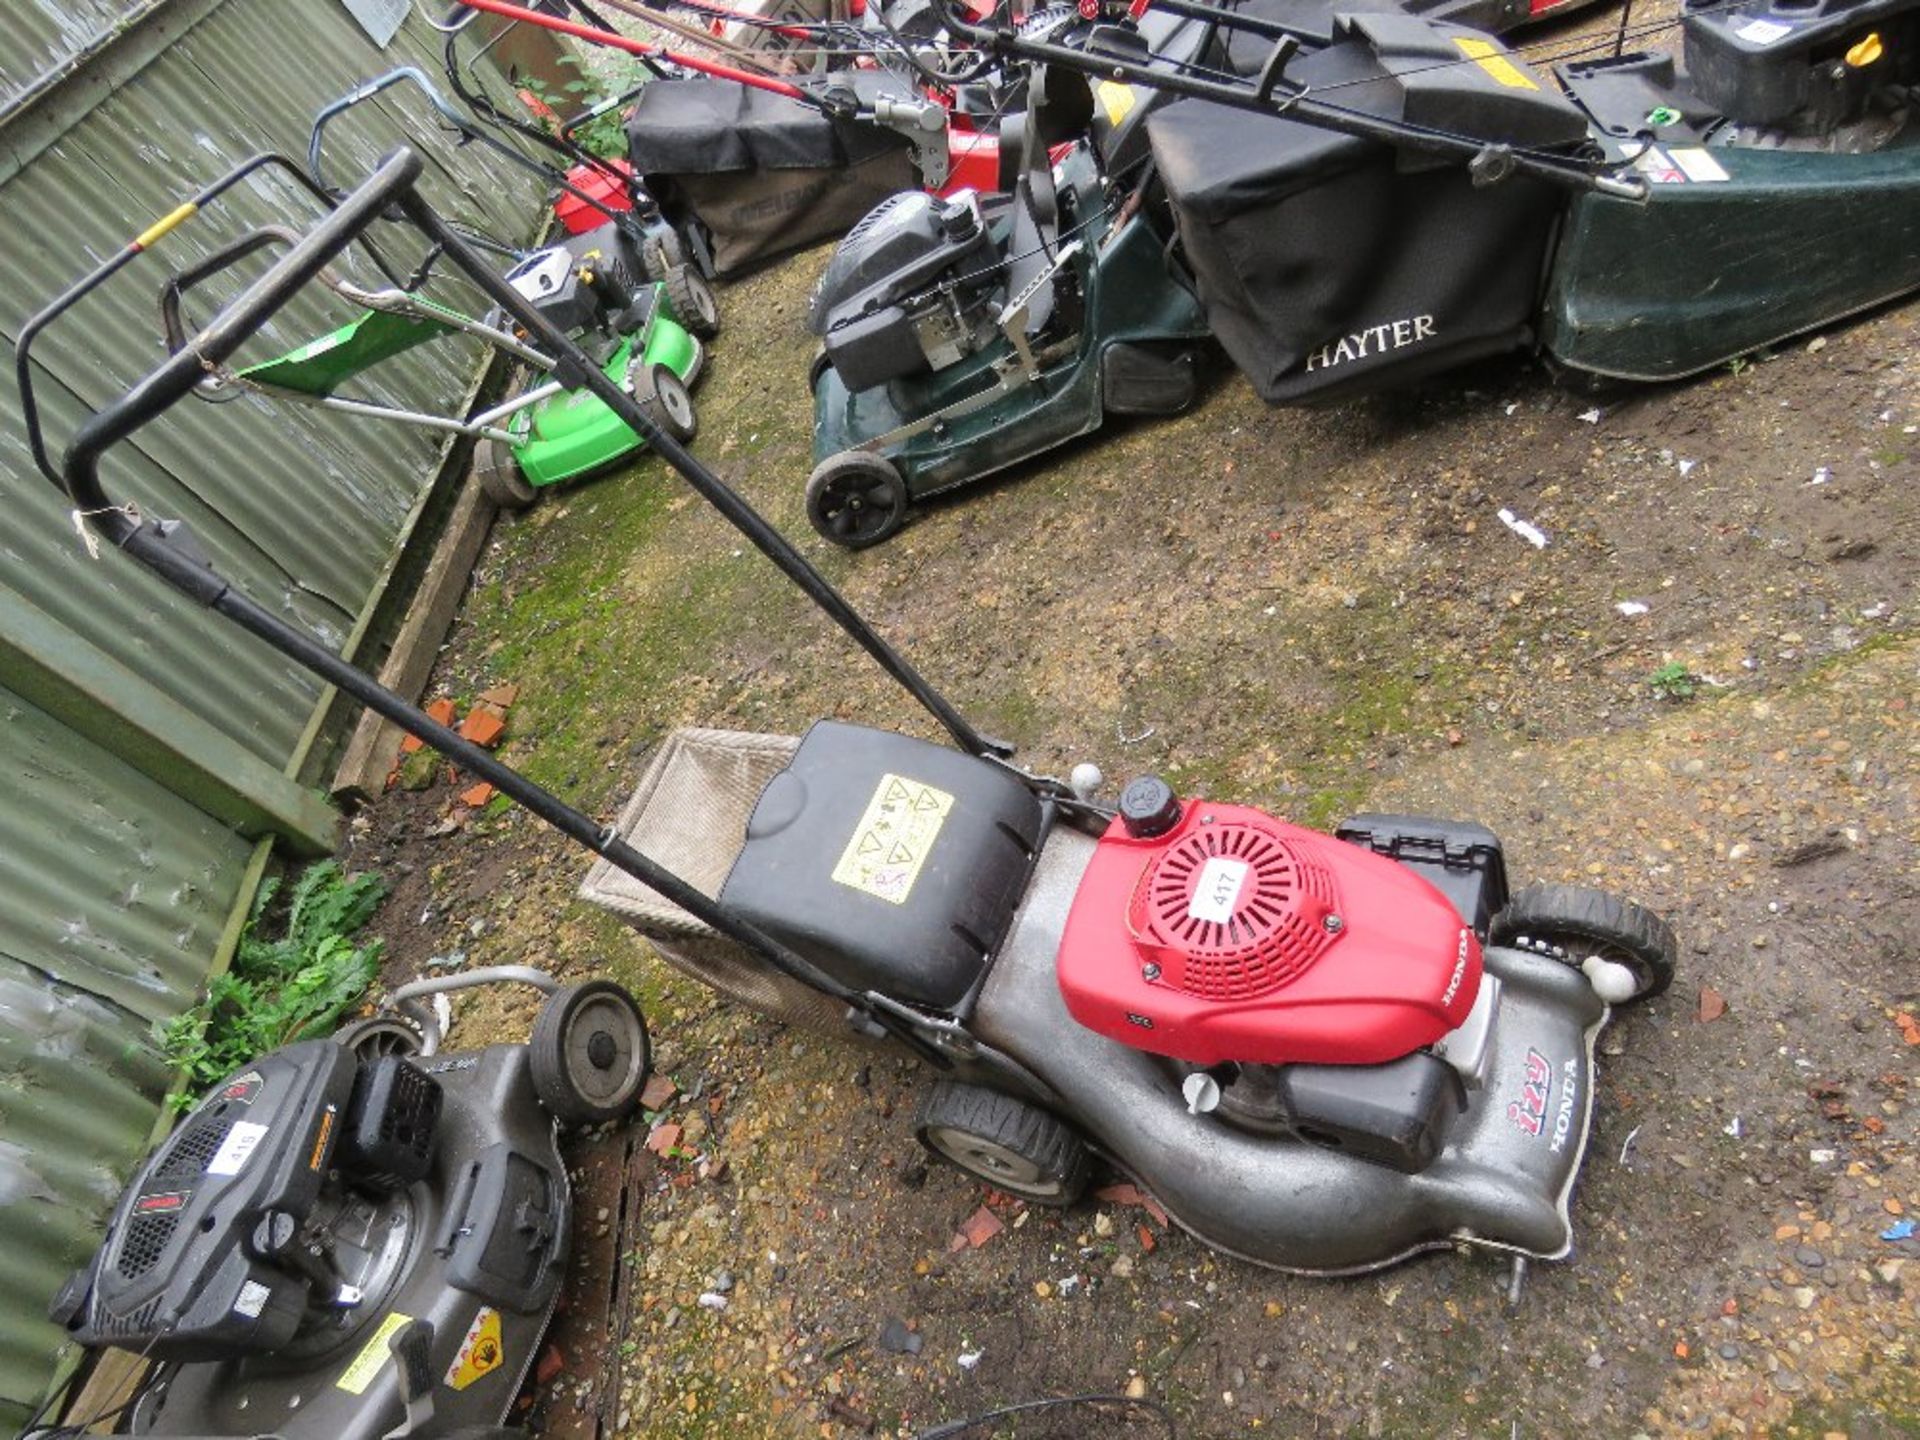 HONDA IZZY LAWNMOWER WITH COLLECTOR, WHEEL MISSING. DIRECT FROM LOCAL LANDSCAPE COMPANY WHO ARE CLOS - Image 2 of 3